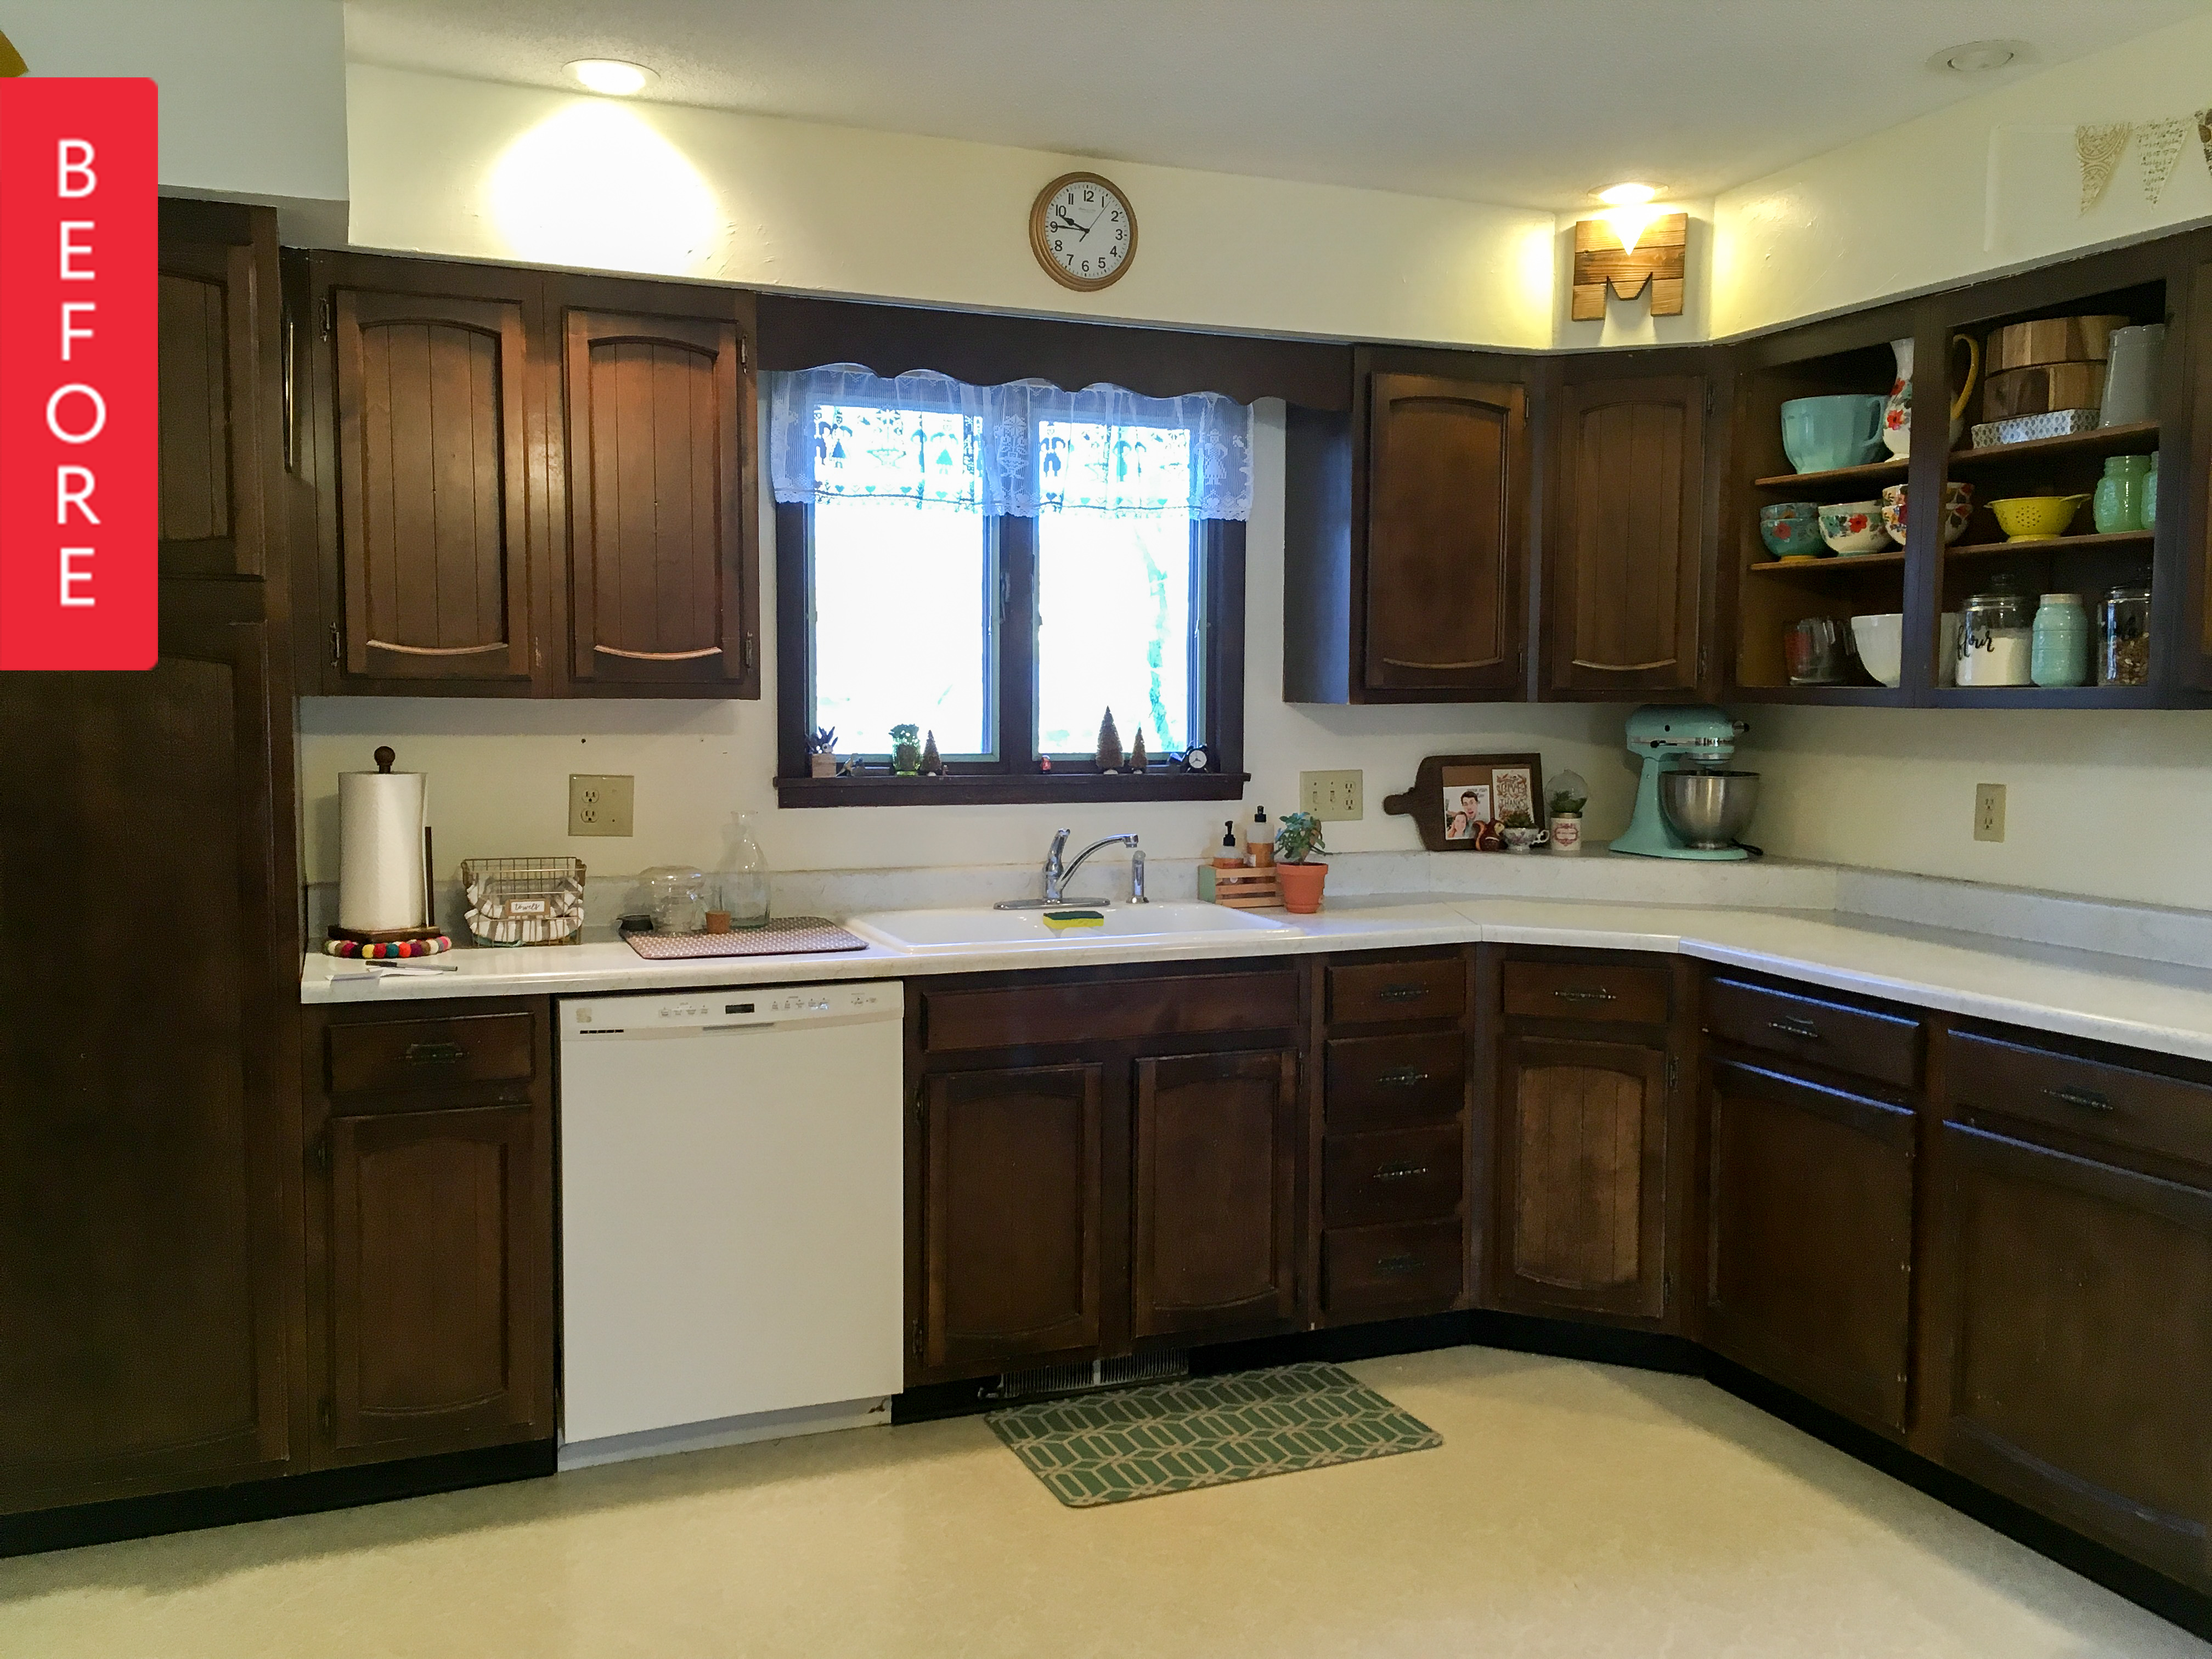 Kitchen Makeover Before & After Results using ALL-IN-ONE Paint 